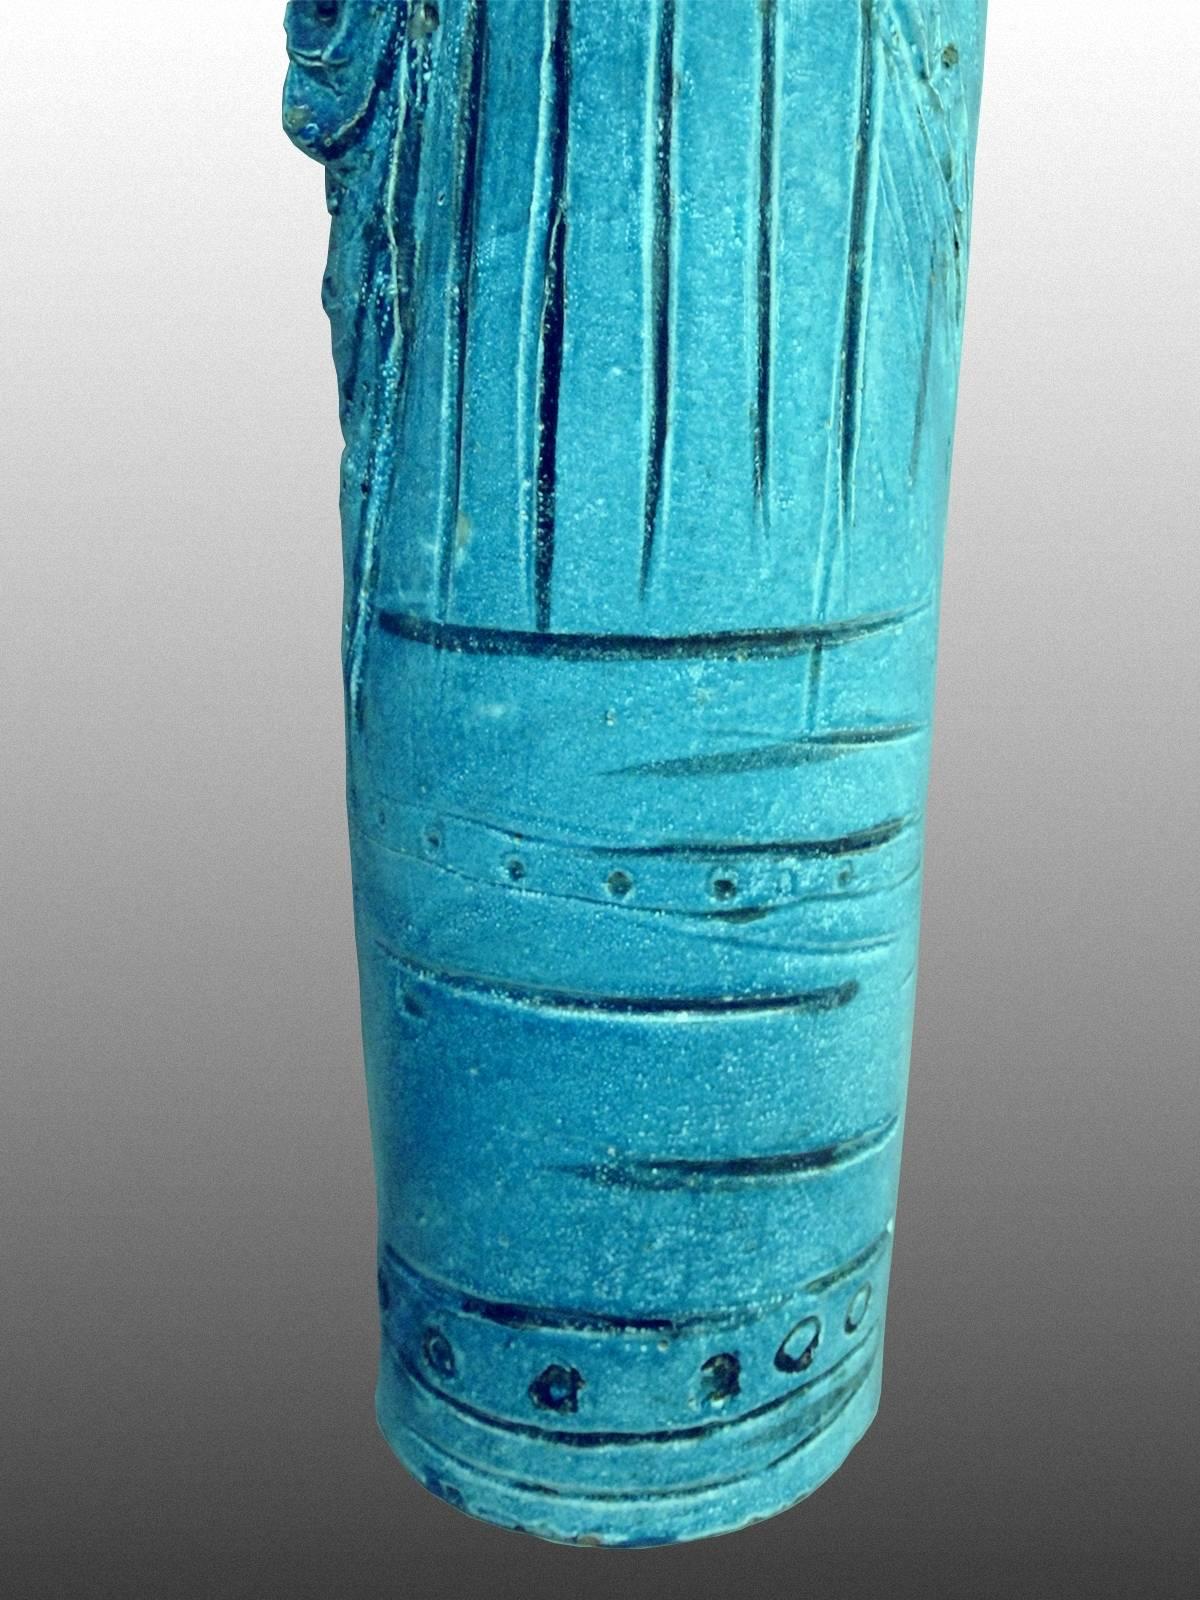 Italian Vase-Sculpture in Blue Glazed Earthenware by Angelo Ungania, circa 1940 For Sale